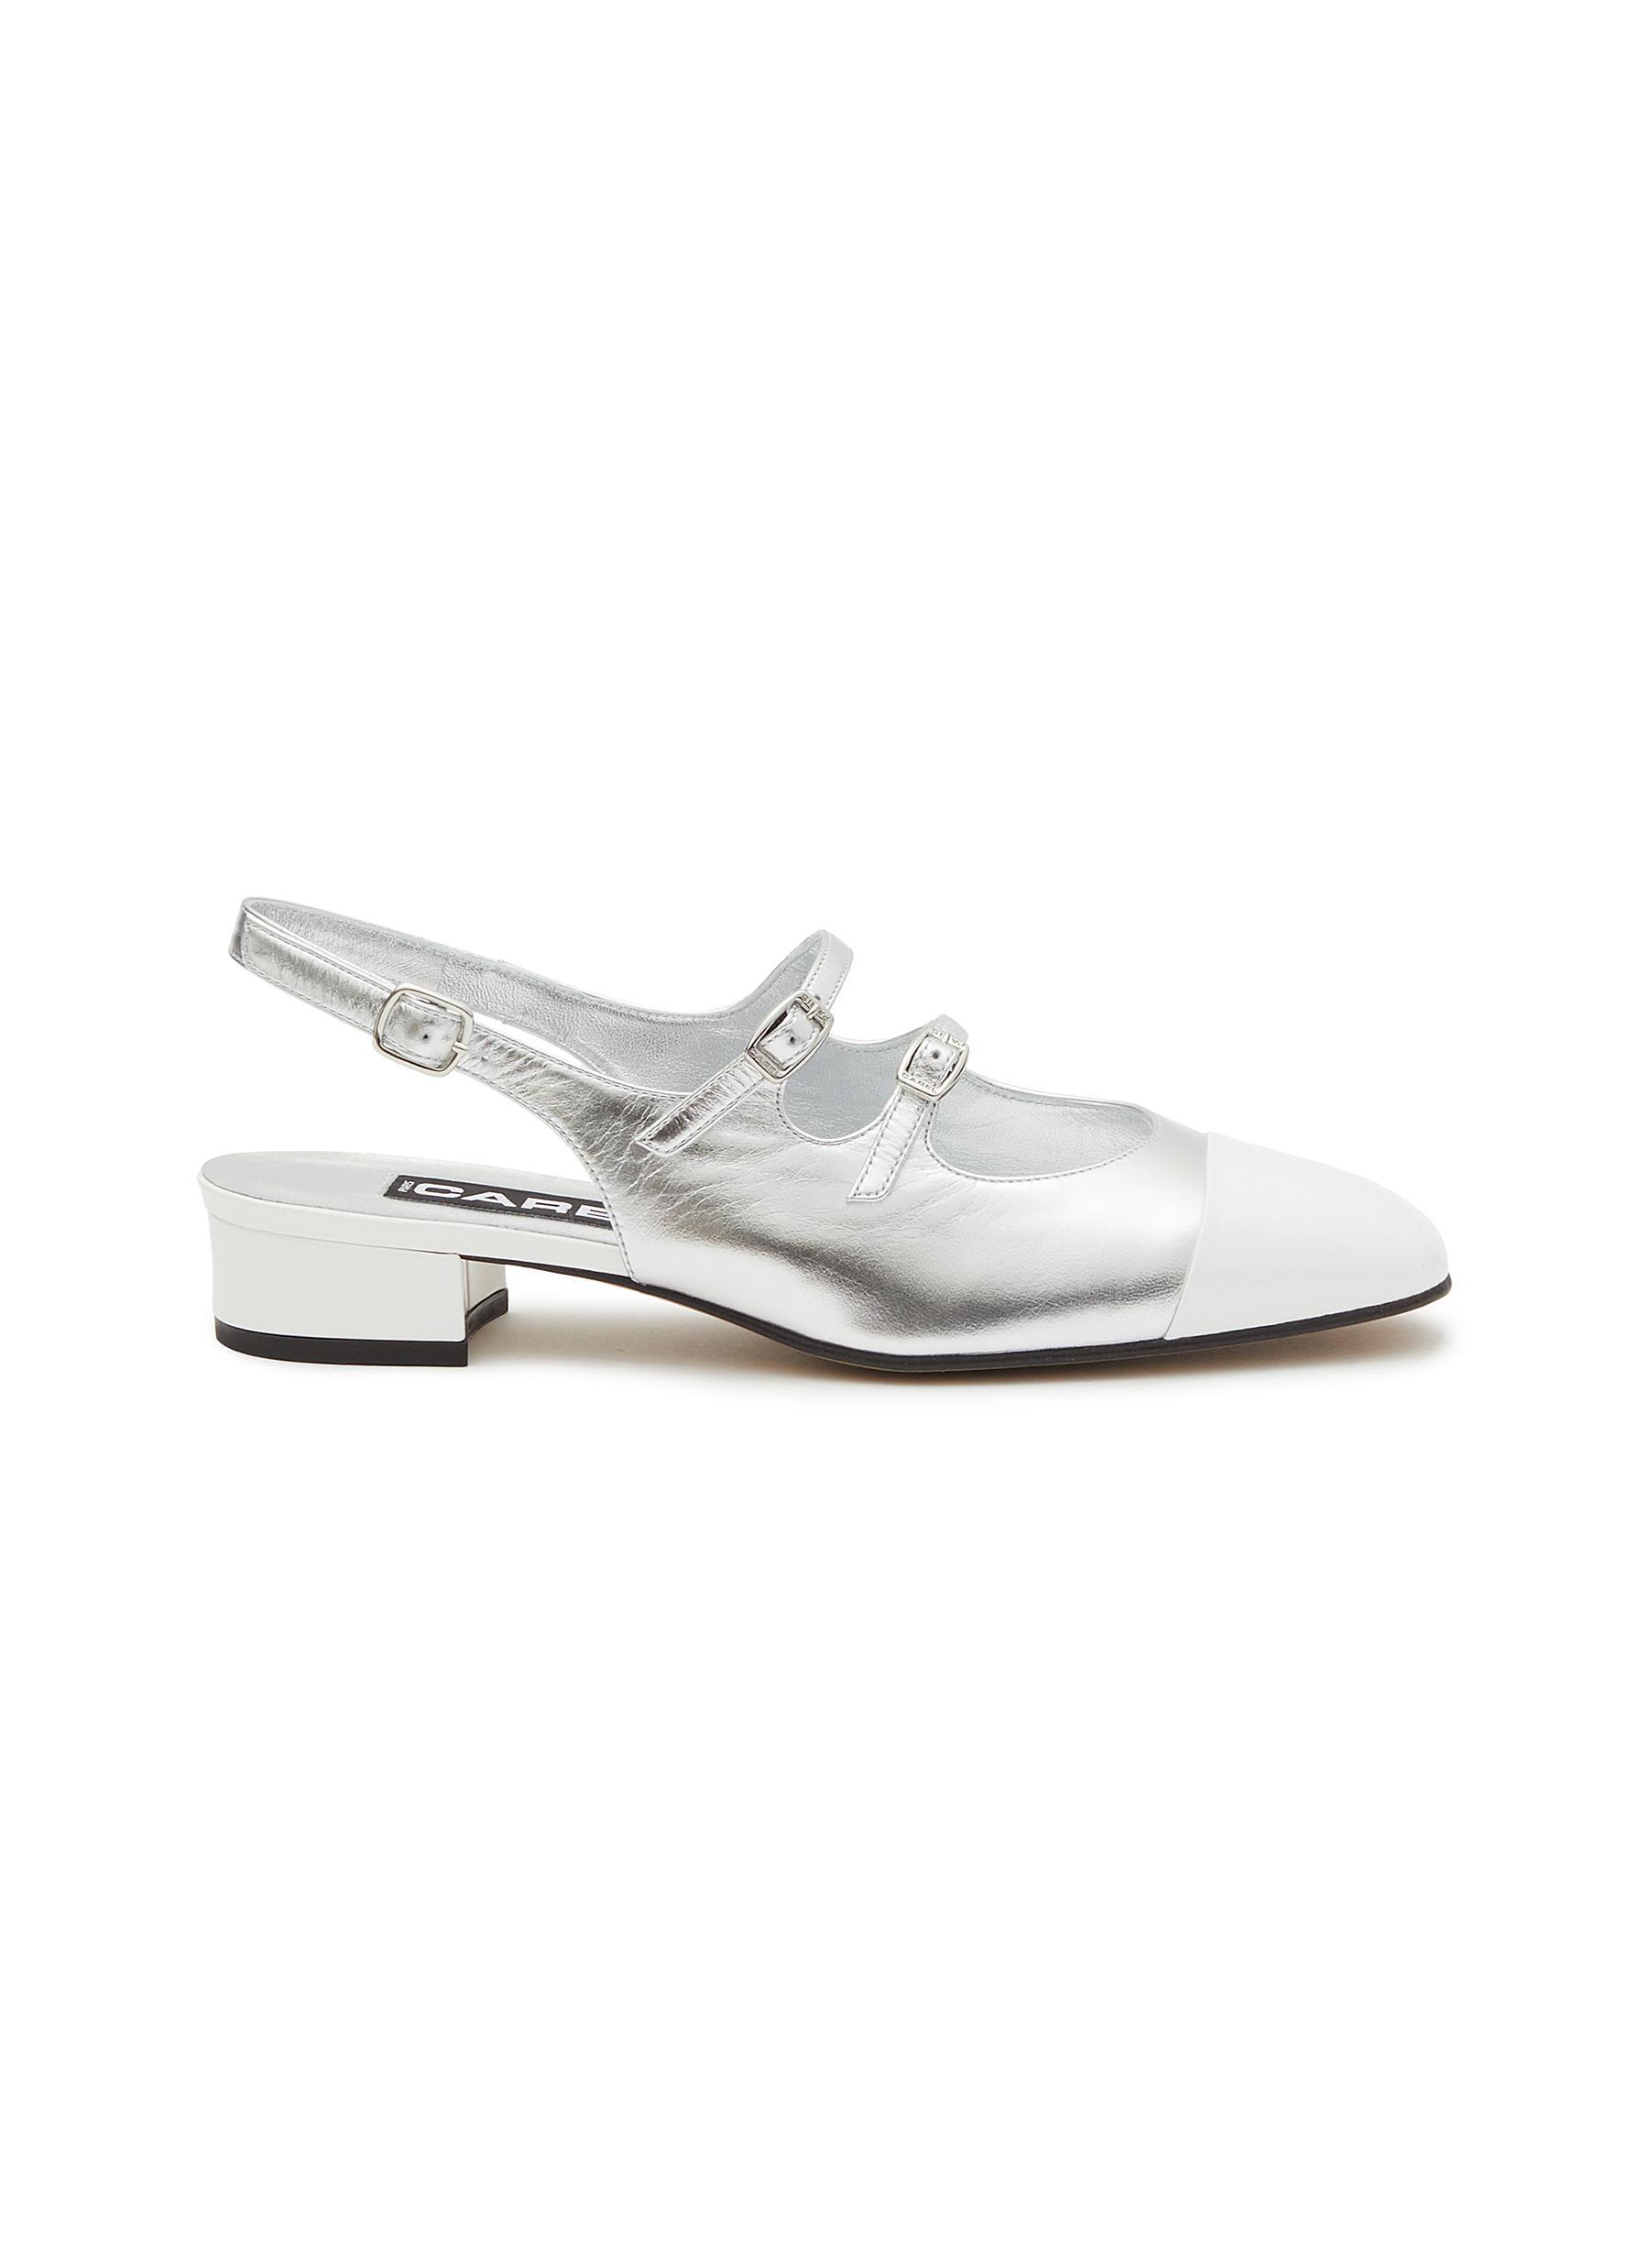 CAREL 'apricot' 20 Double Strap Contrast Toe Cap Leather Slingback Heels in  White | Lyst